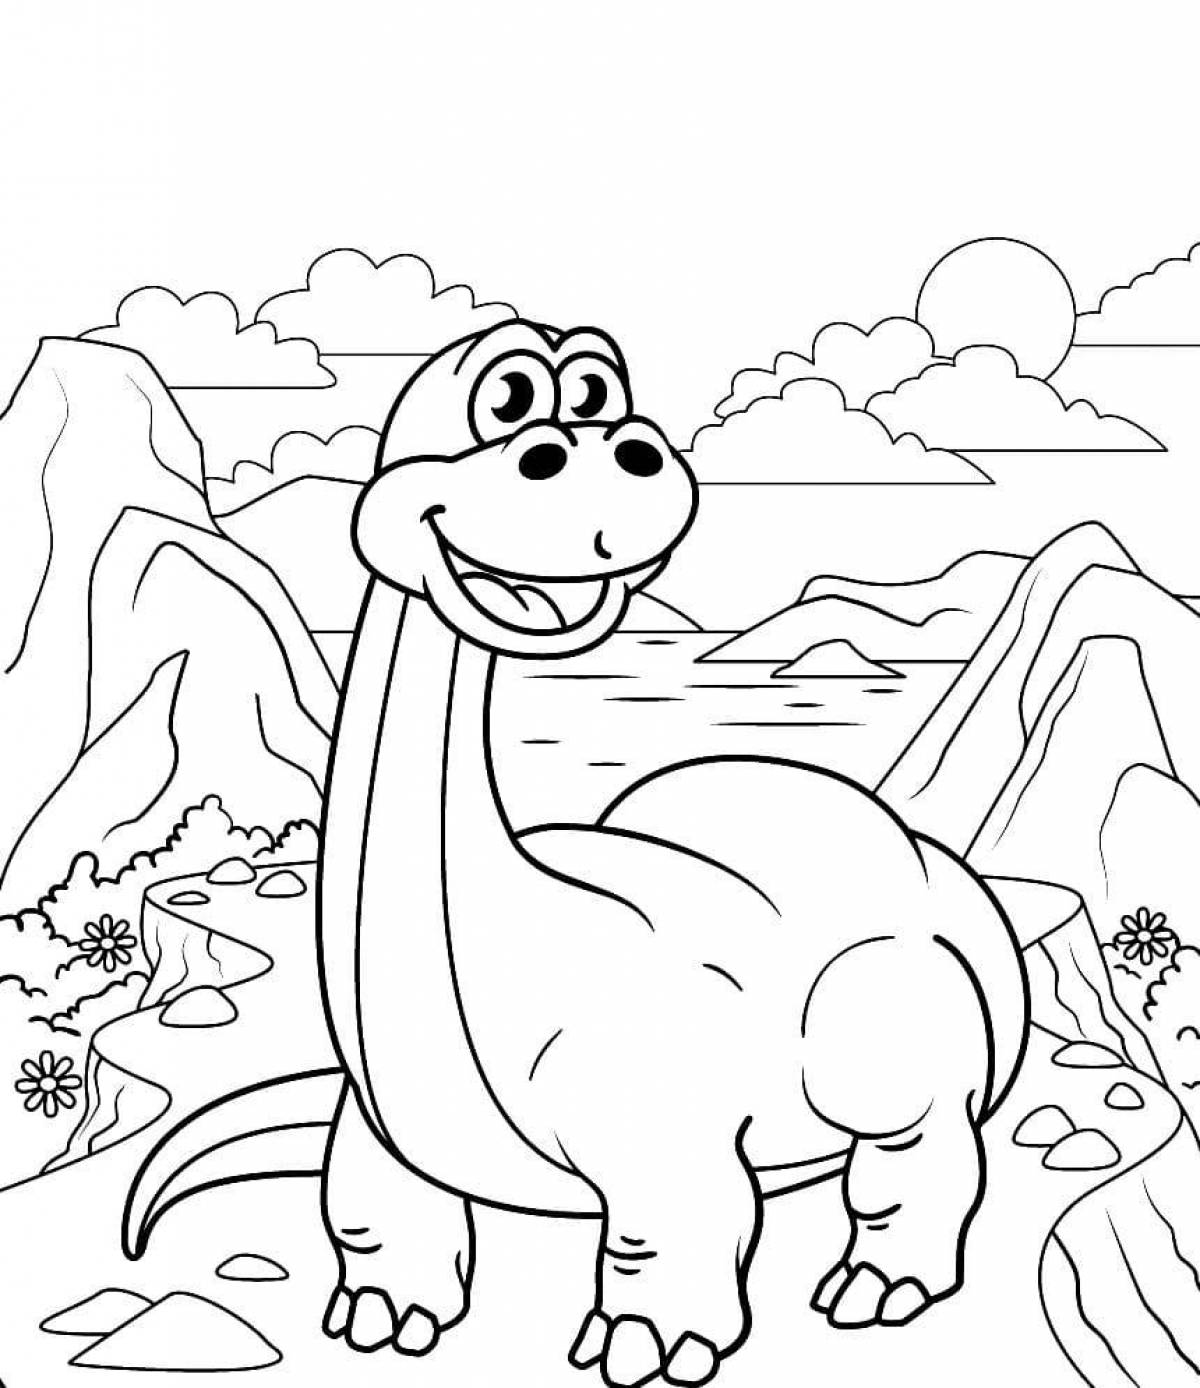 Crazy dinosaur coloring book for 3-4 year olds